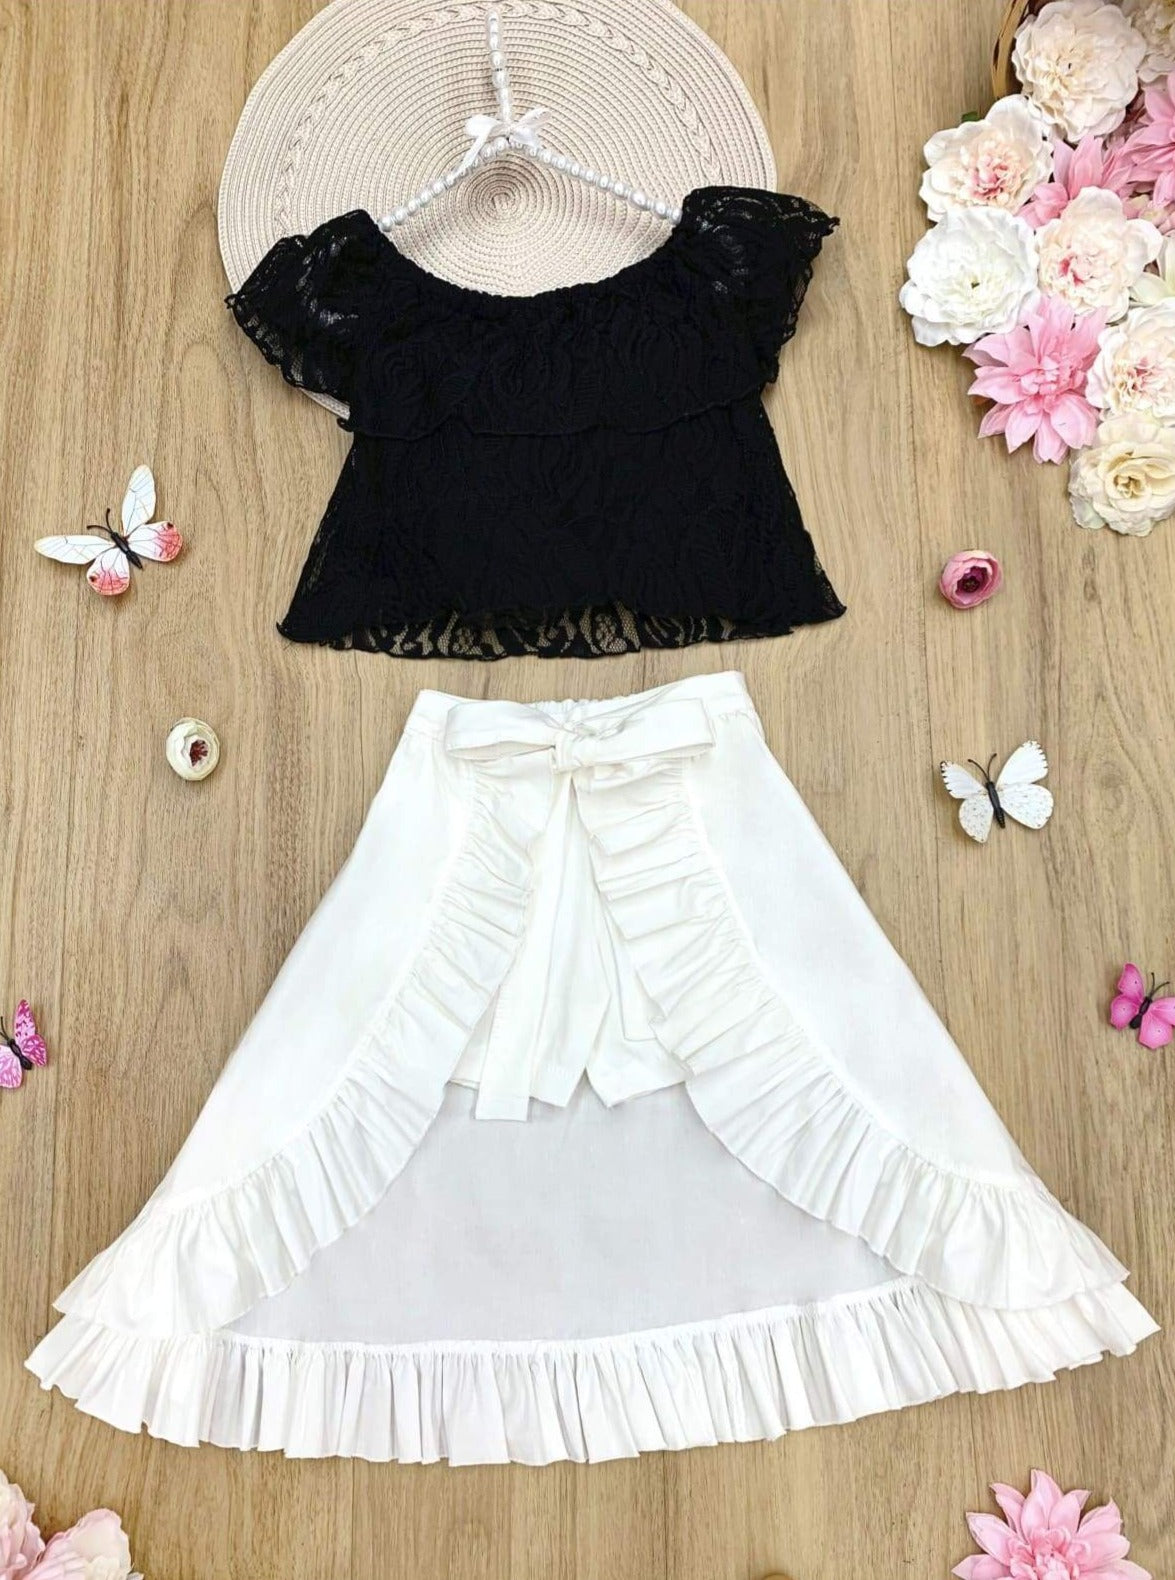 Girls Ruffle Lace Crop Top and Hi-Lo Skirted Shorts Set - White / 2T/3T - Girls Spring Casual Set